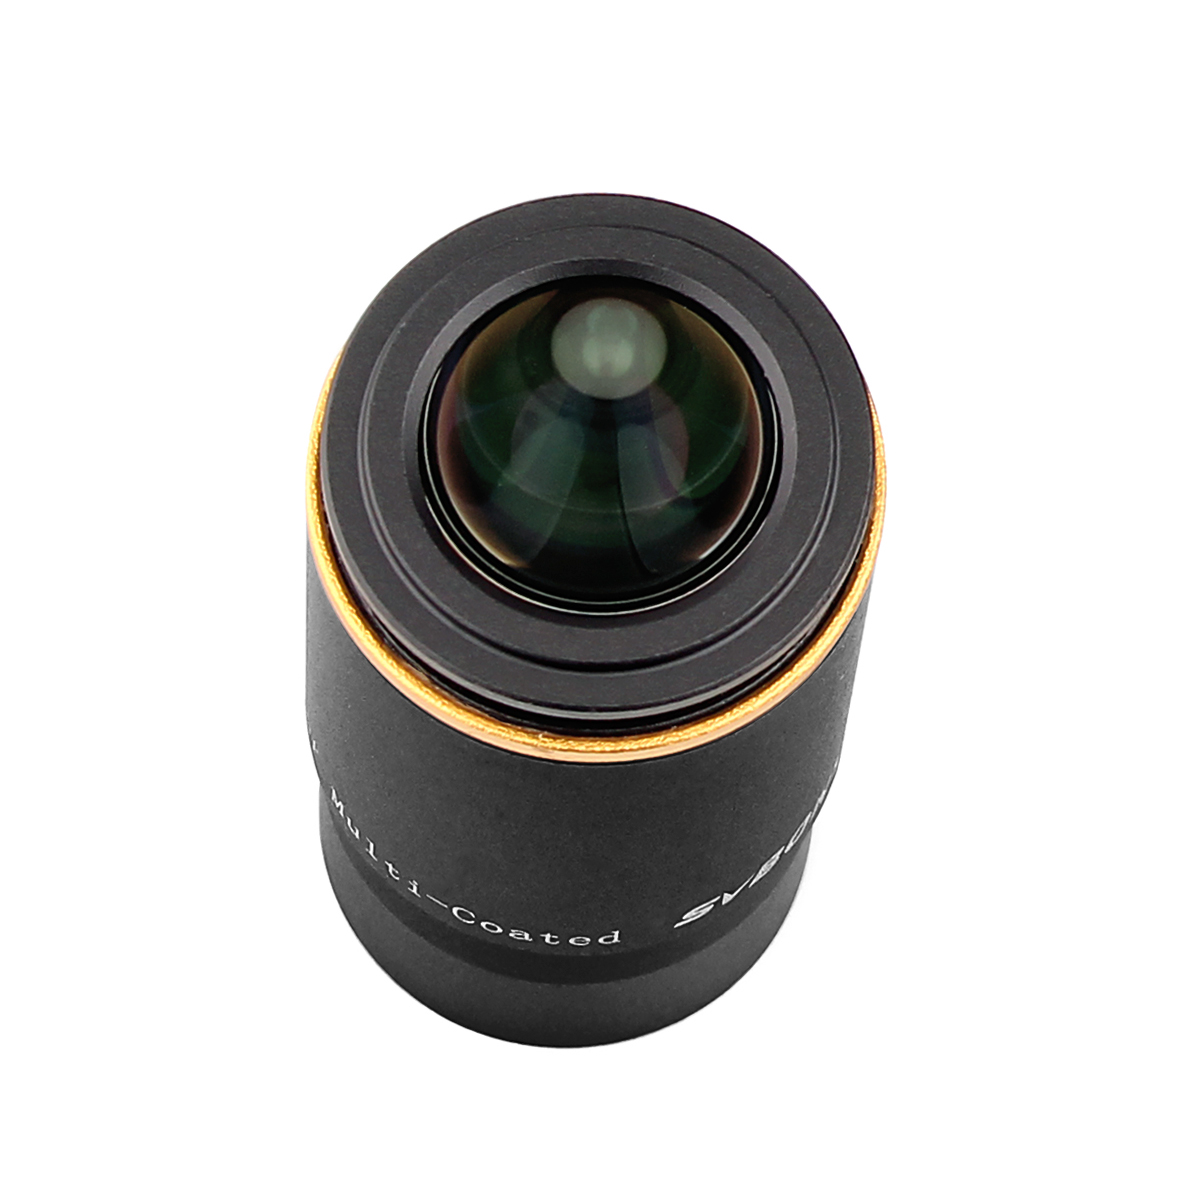 SVBONY Fully Multi-Coated 1.25" 9mm Ultra Wide Angle Eyepiece for Astronomical Telescope